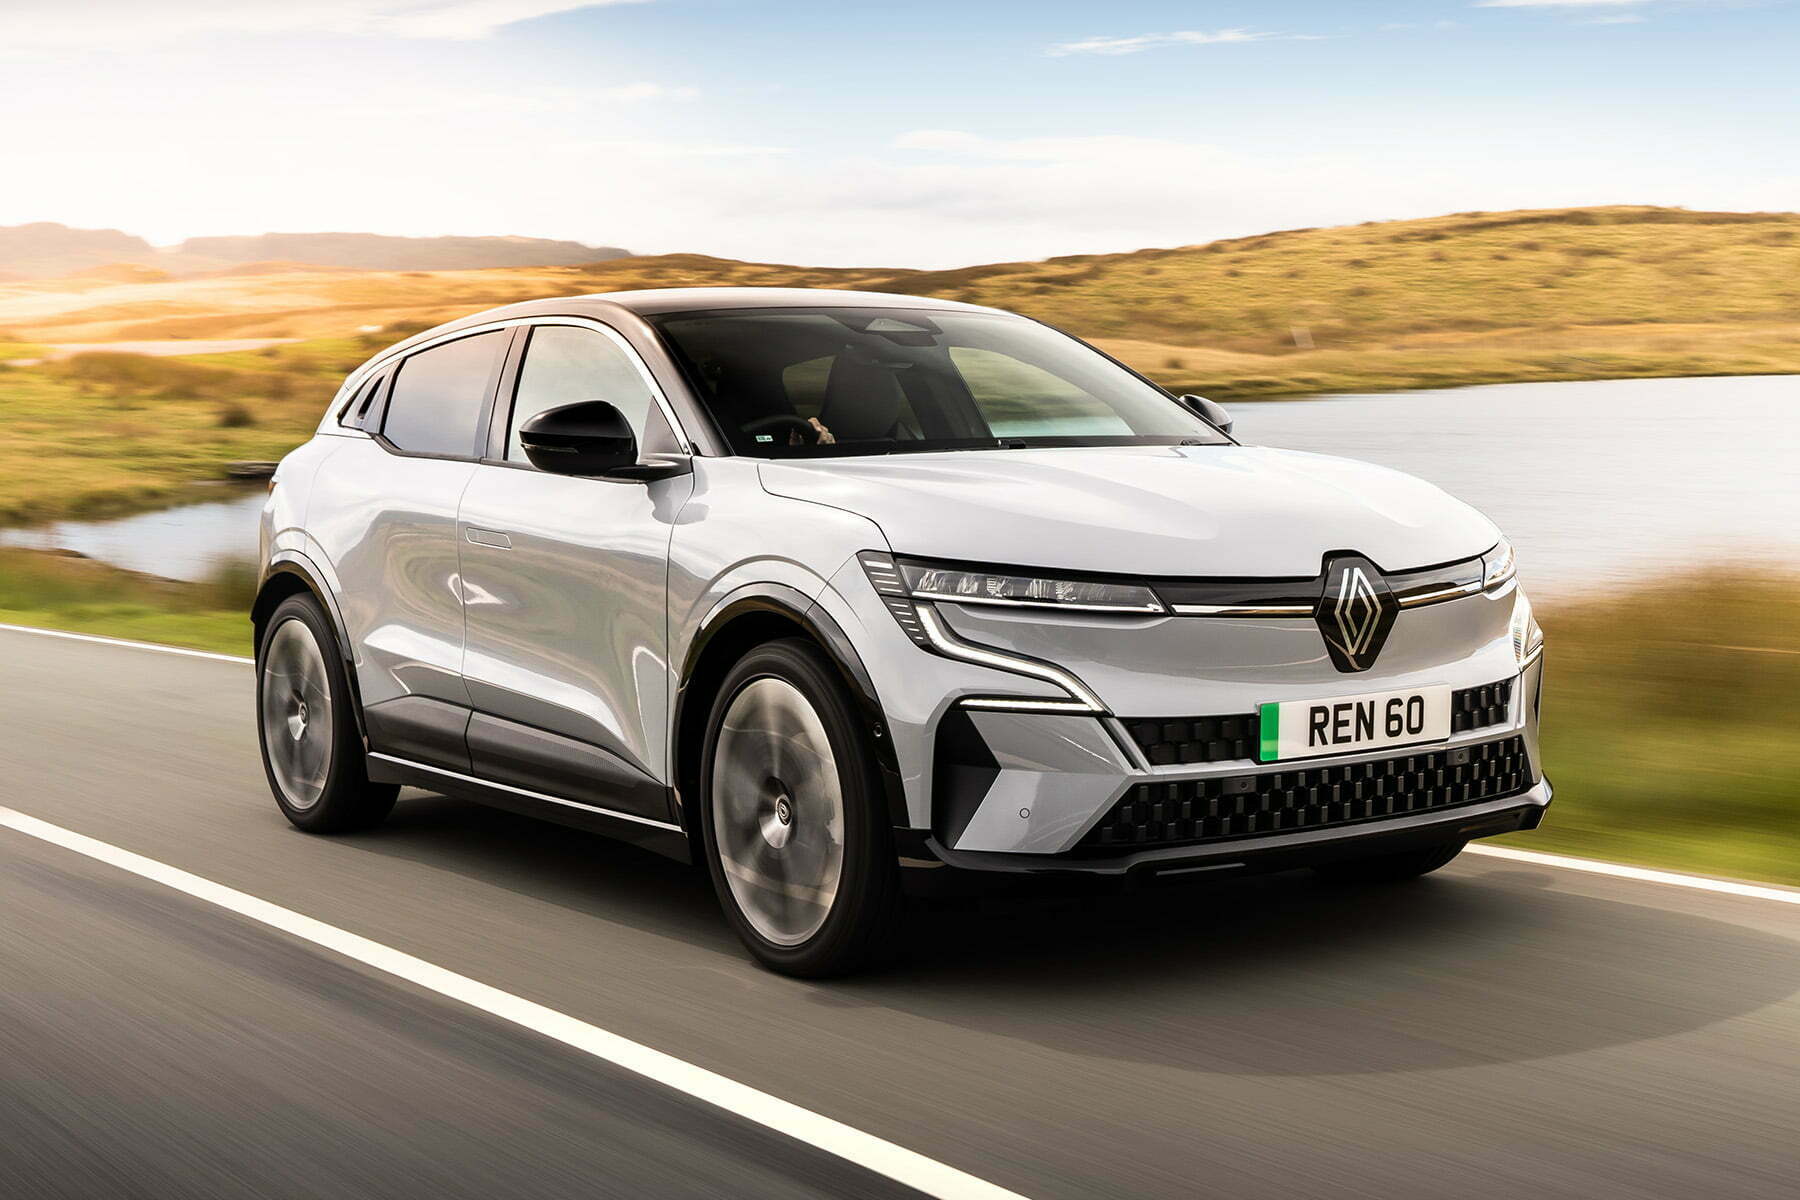 Renault Megane E-Tech front view | Expert Rating